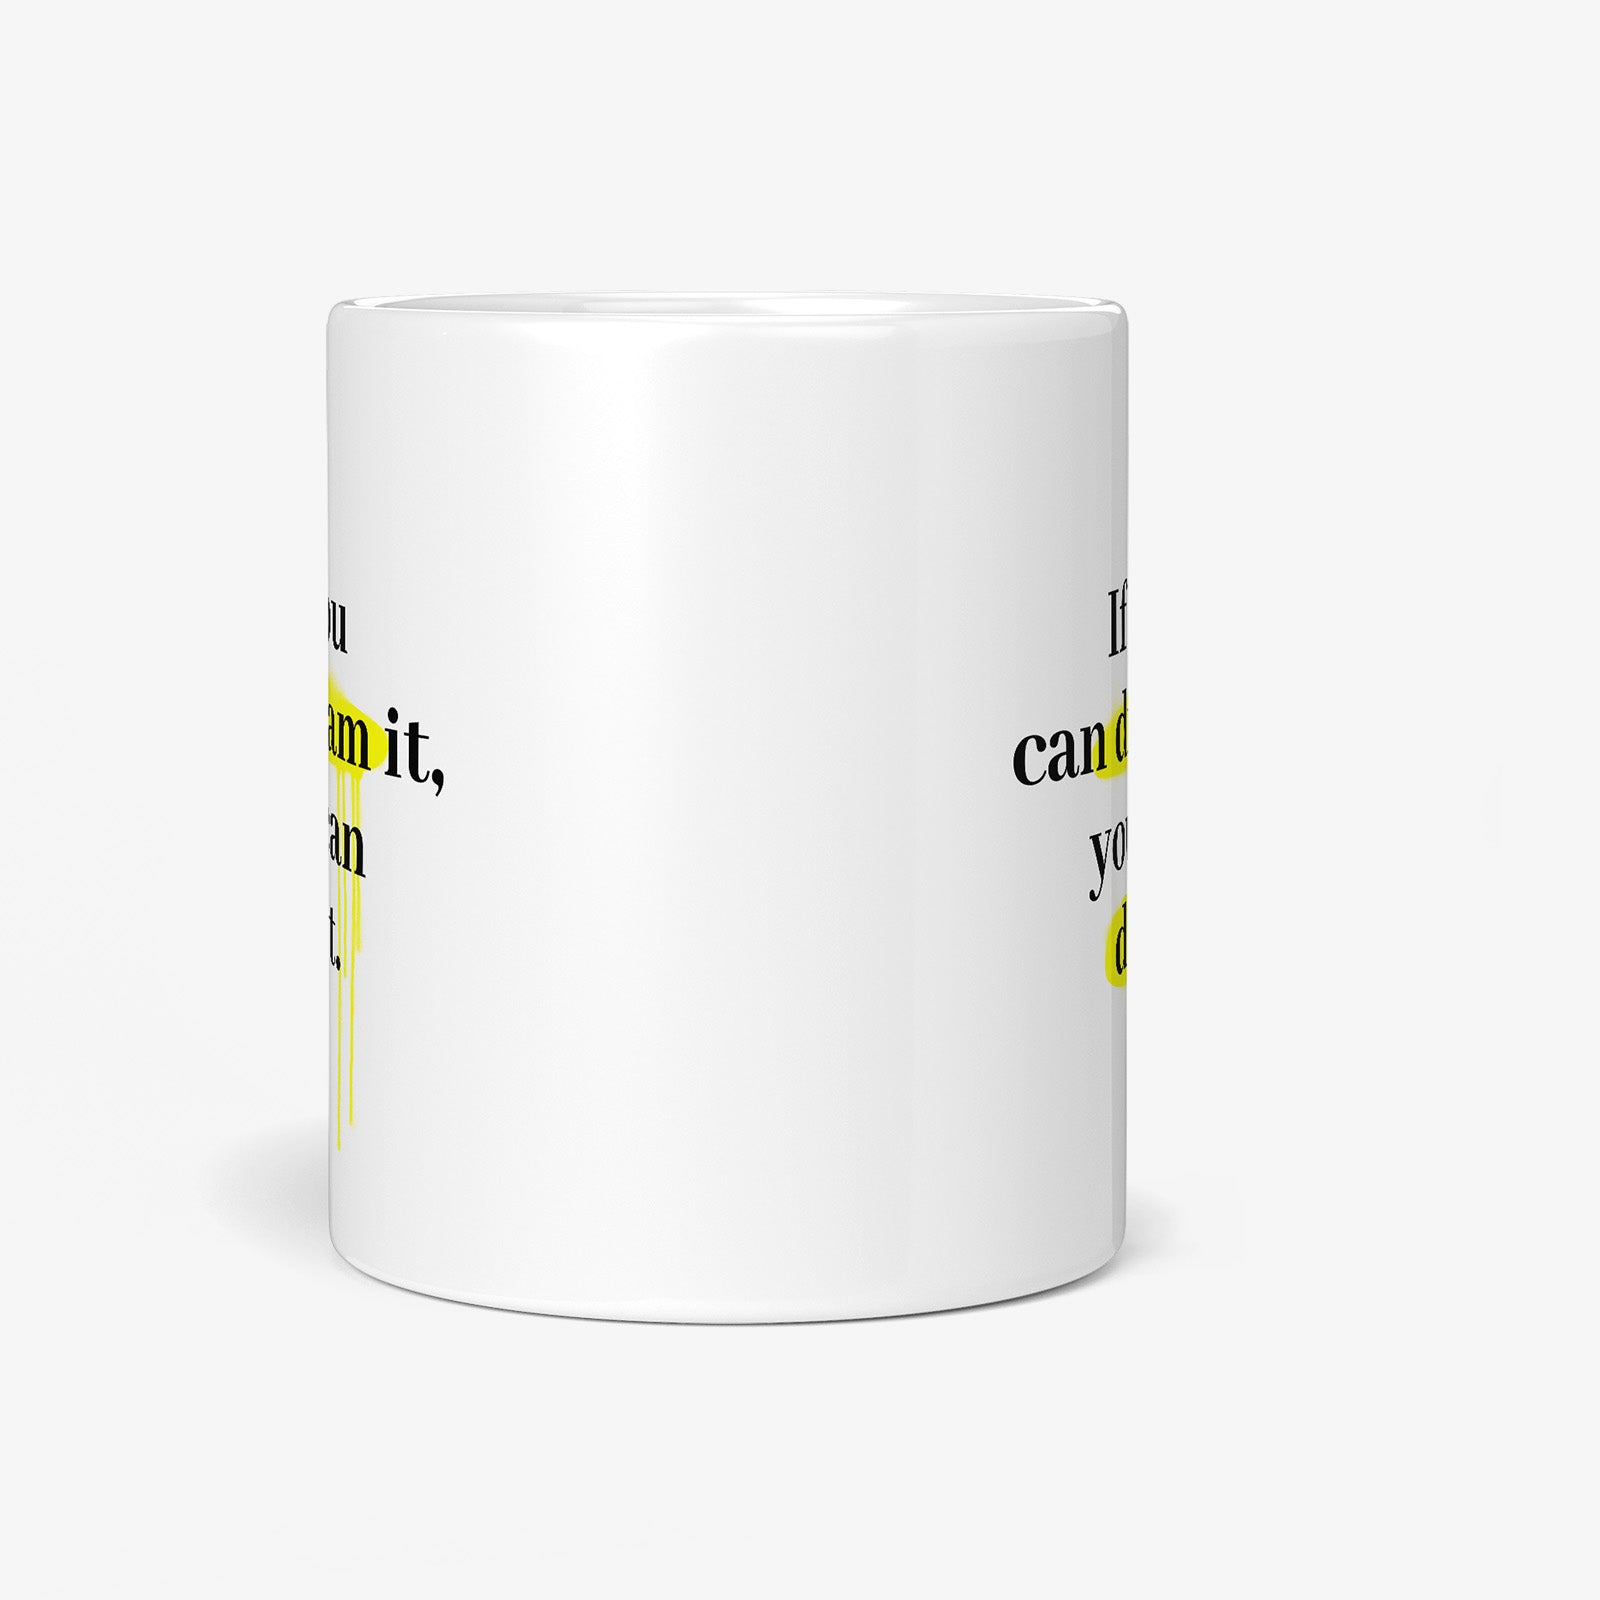 Be inspired by Walt Disney's famous quote, "If you can dream it, you can do it" on this white and glossy 11oz coffee mug with a front view.